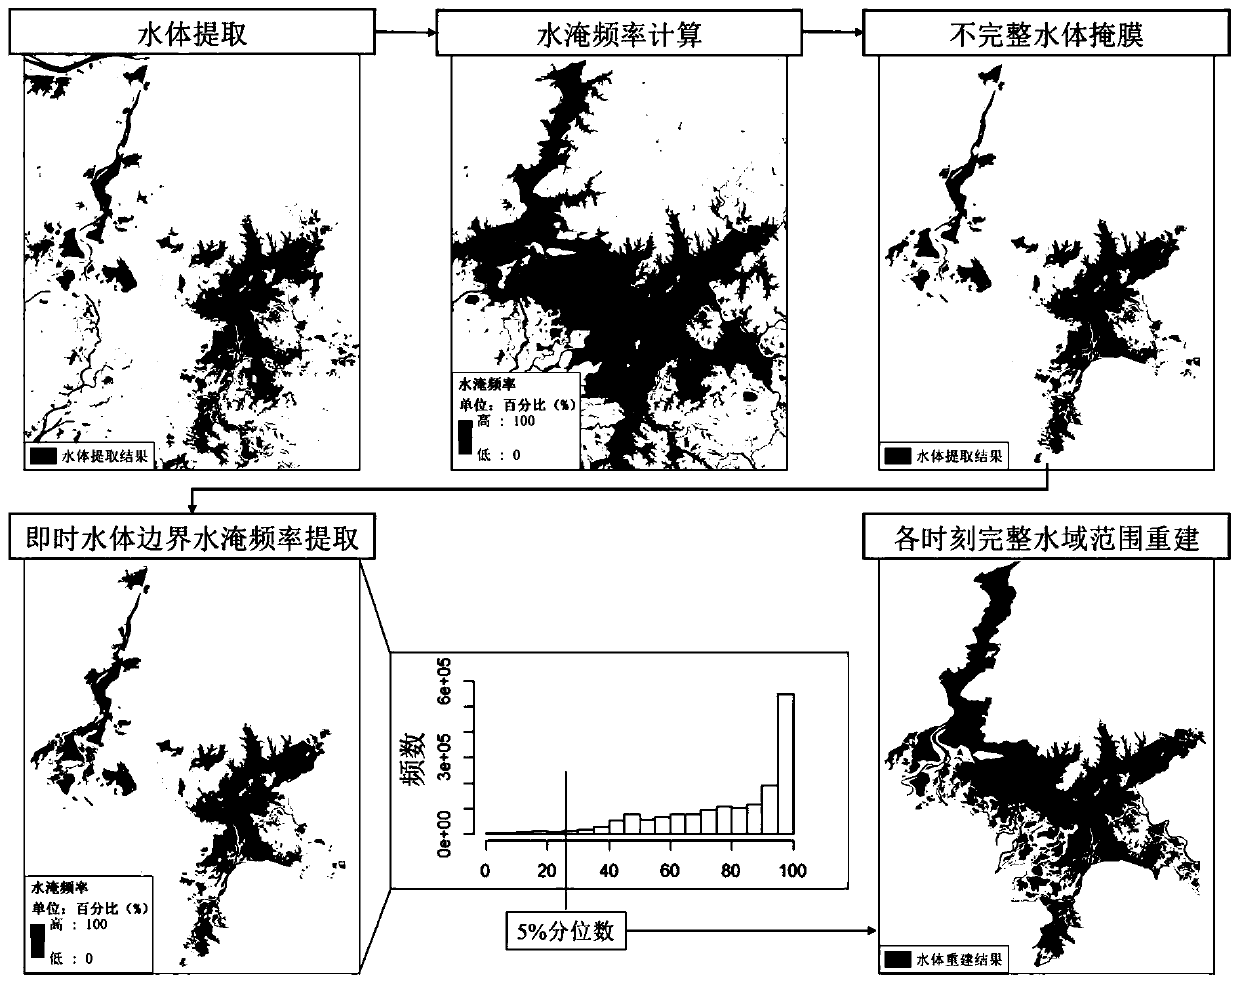 Lake long-time-sequence continuous water area change reconstruction method based on remote sensing big data platform